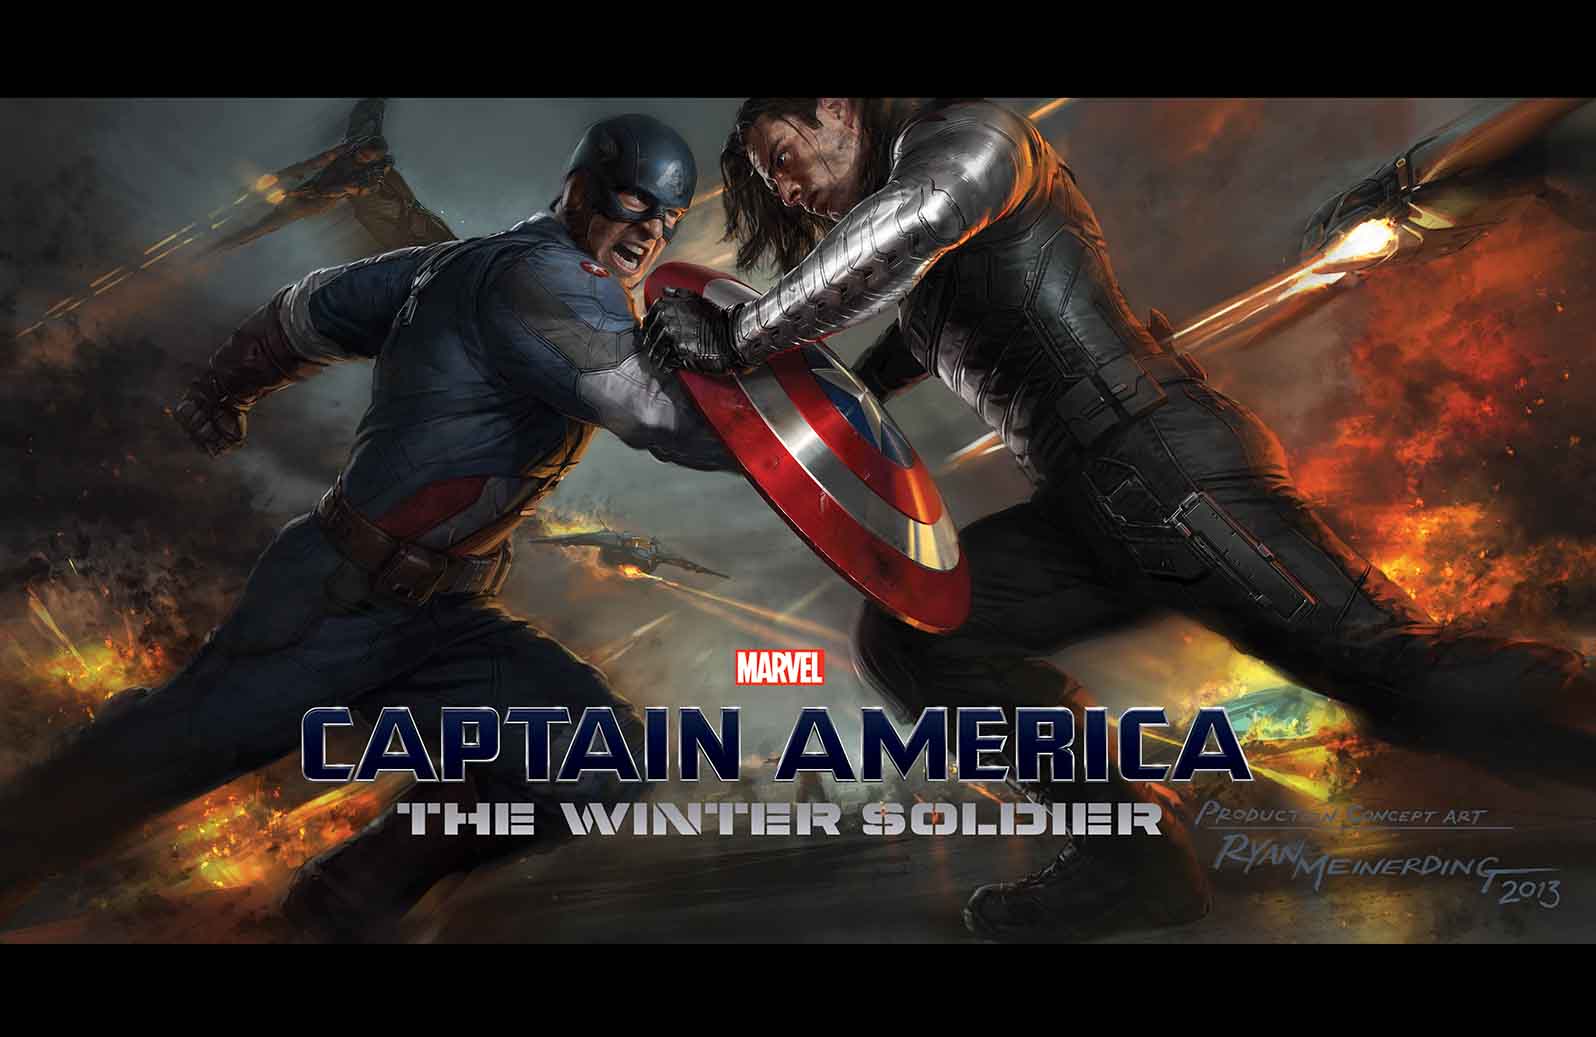 Marvel's Captain America: The Winter Soldier - The Art of the Movie (Hardcover)